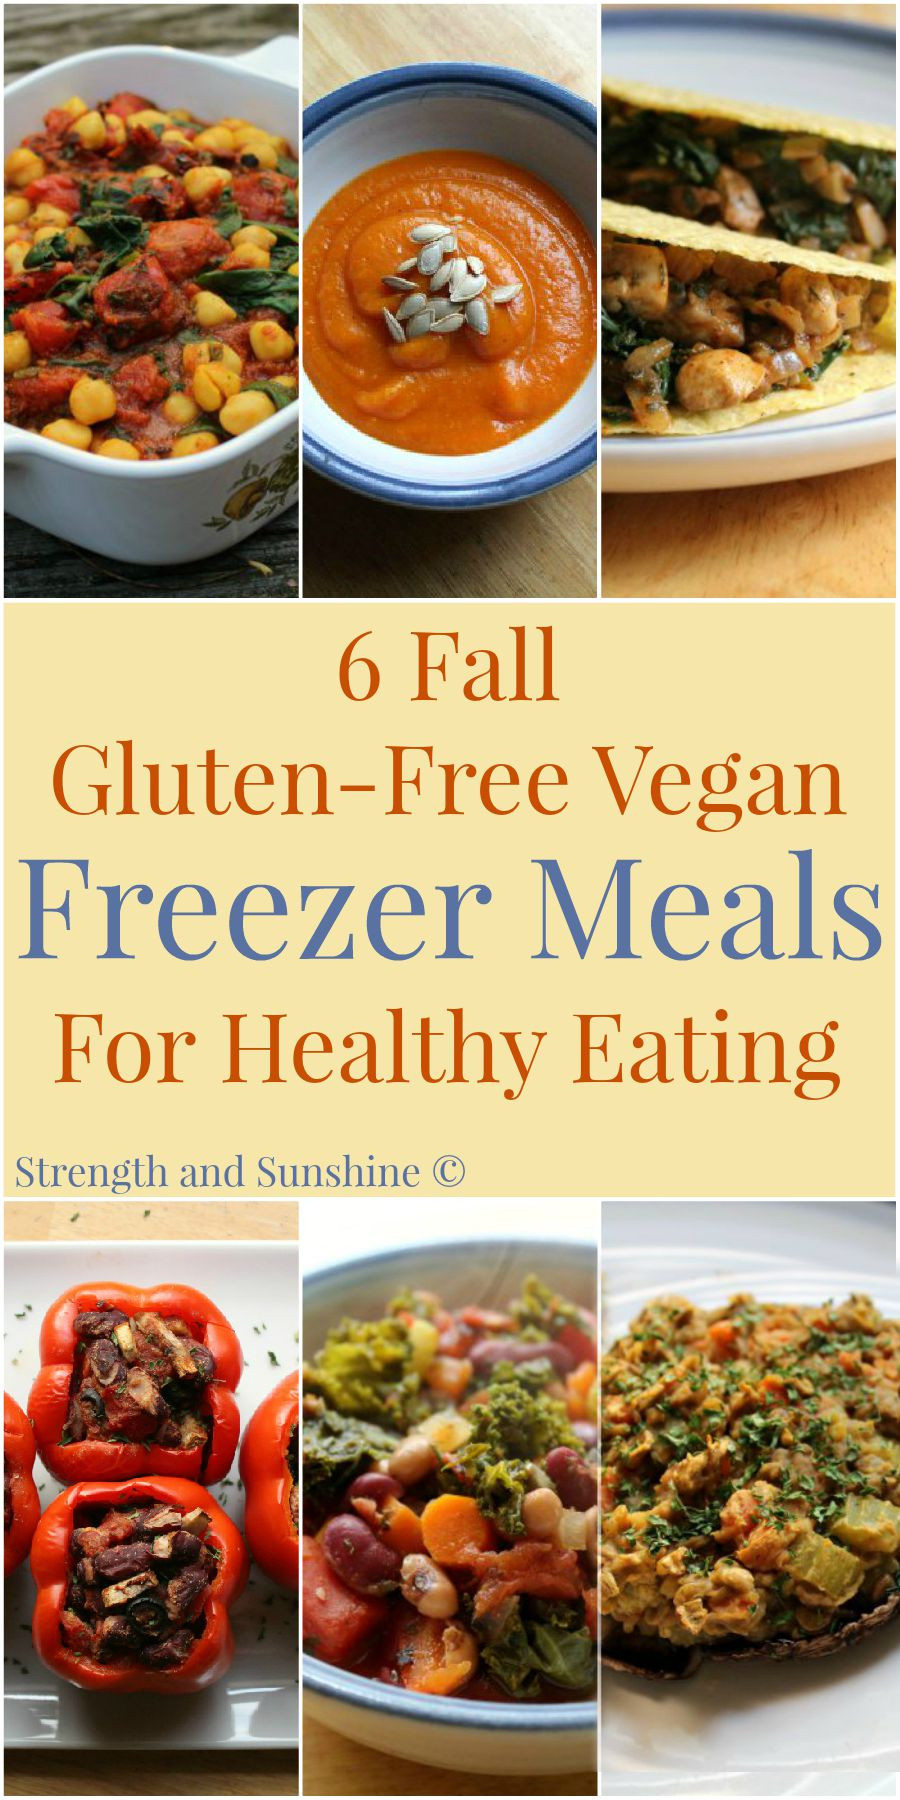 Healthy Gluten Free Lunches
 6 Fall Gluten Free Vegan Freezer Meals For Healthy Eating